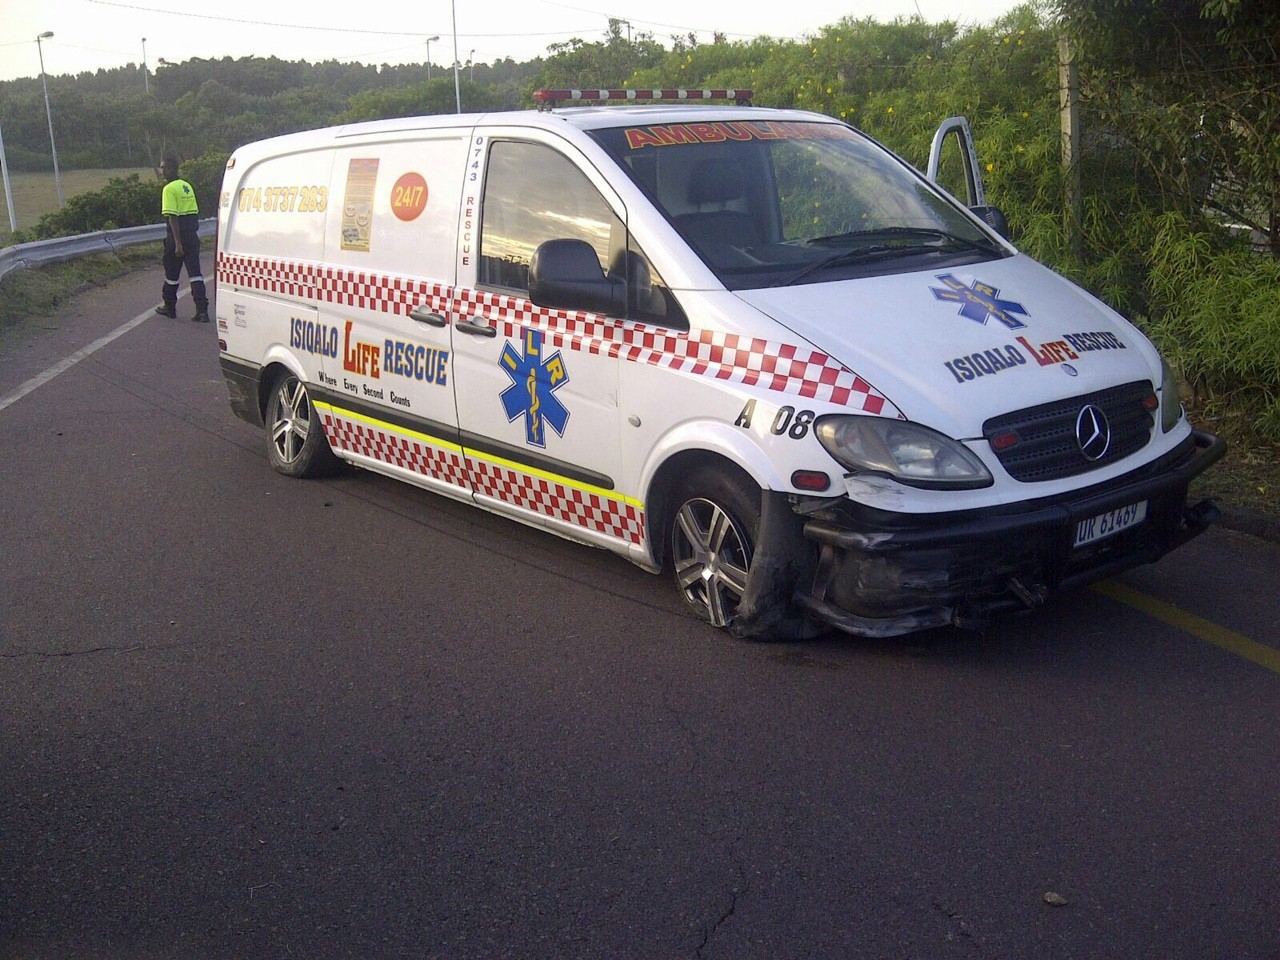 Ambulance smashes into barrier on the M4 Ruth First Highway